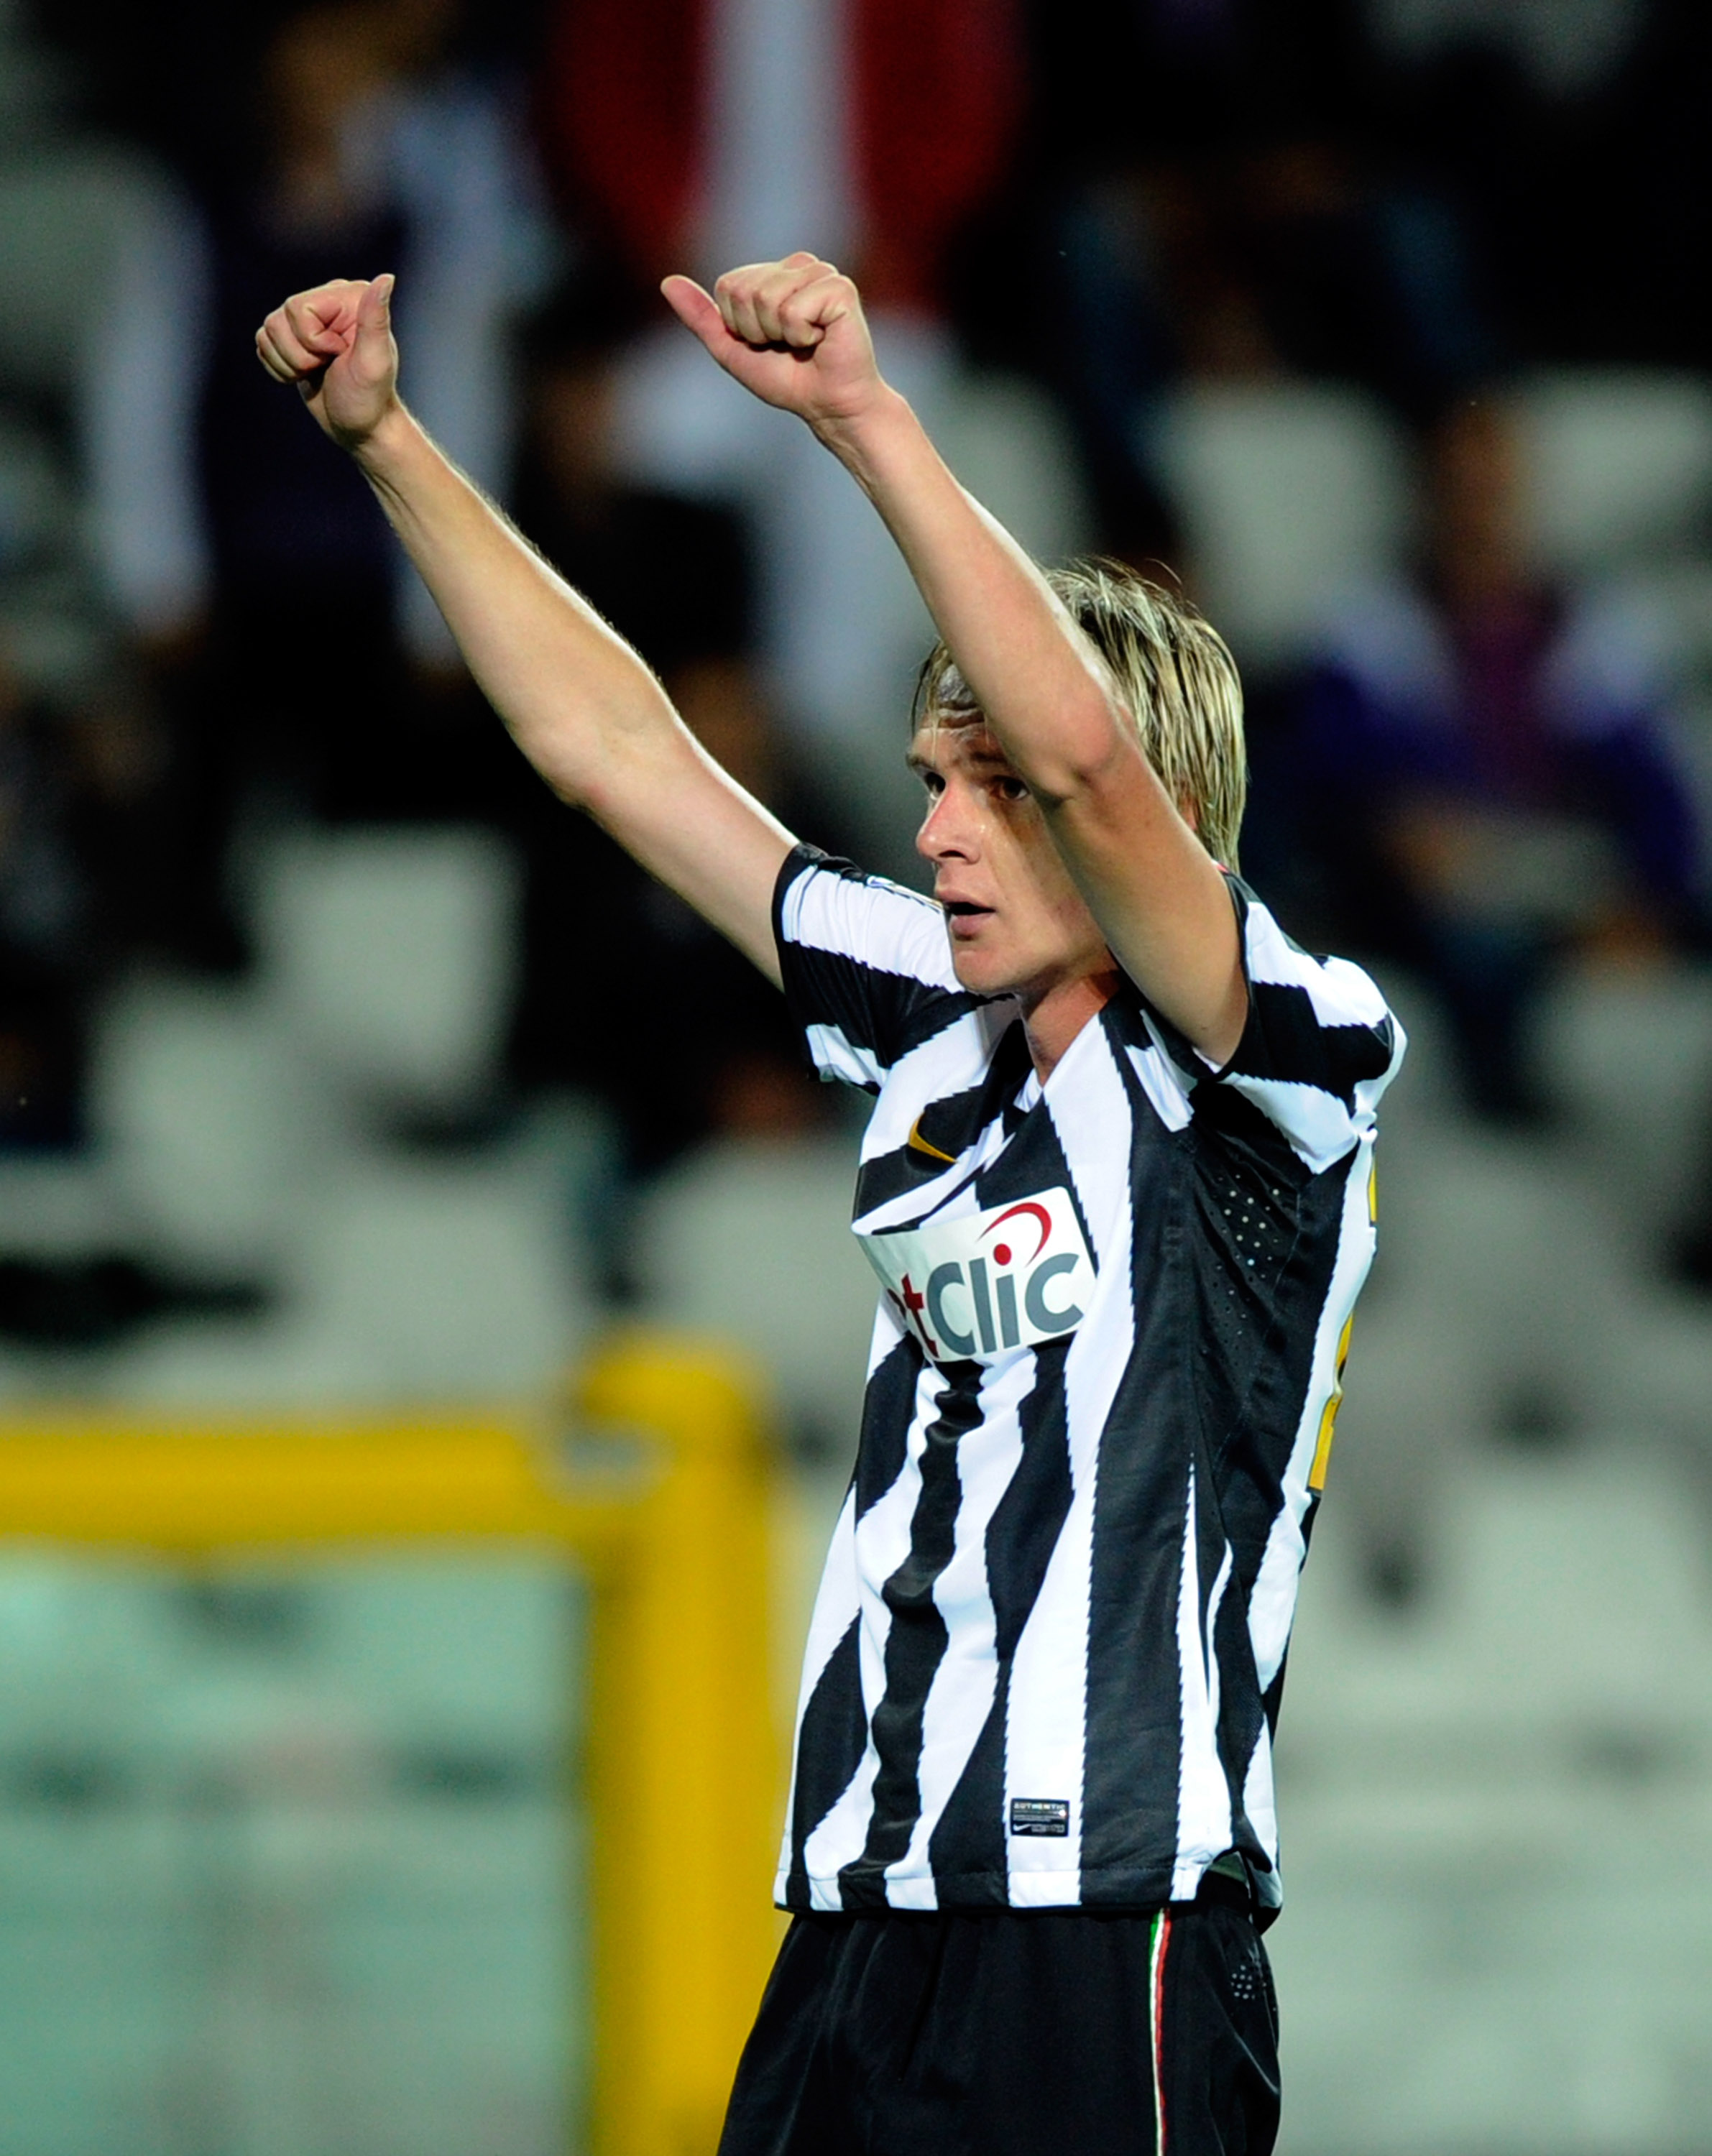 TURIN, ITALY - SEPTEMBER 26:  Milos Krasic of Juventus FC celebrates after the fourth goal during the Serie A match between Juventus and Cagliari at Olimpico Stadium on September 26, 2010 in Turin, Italy.  (Photo by Claudio Villa/Getty Images)